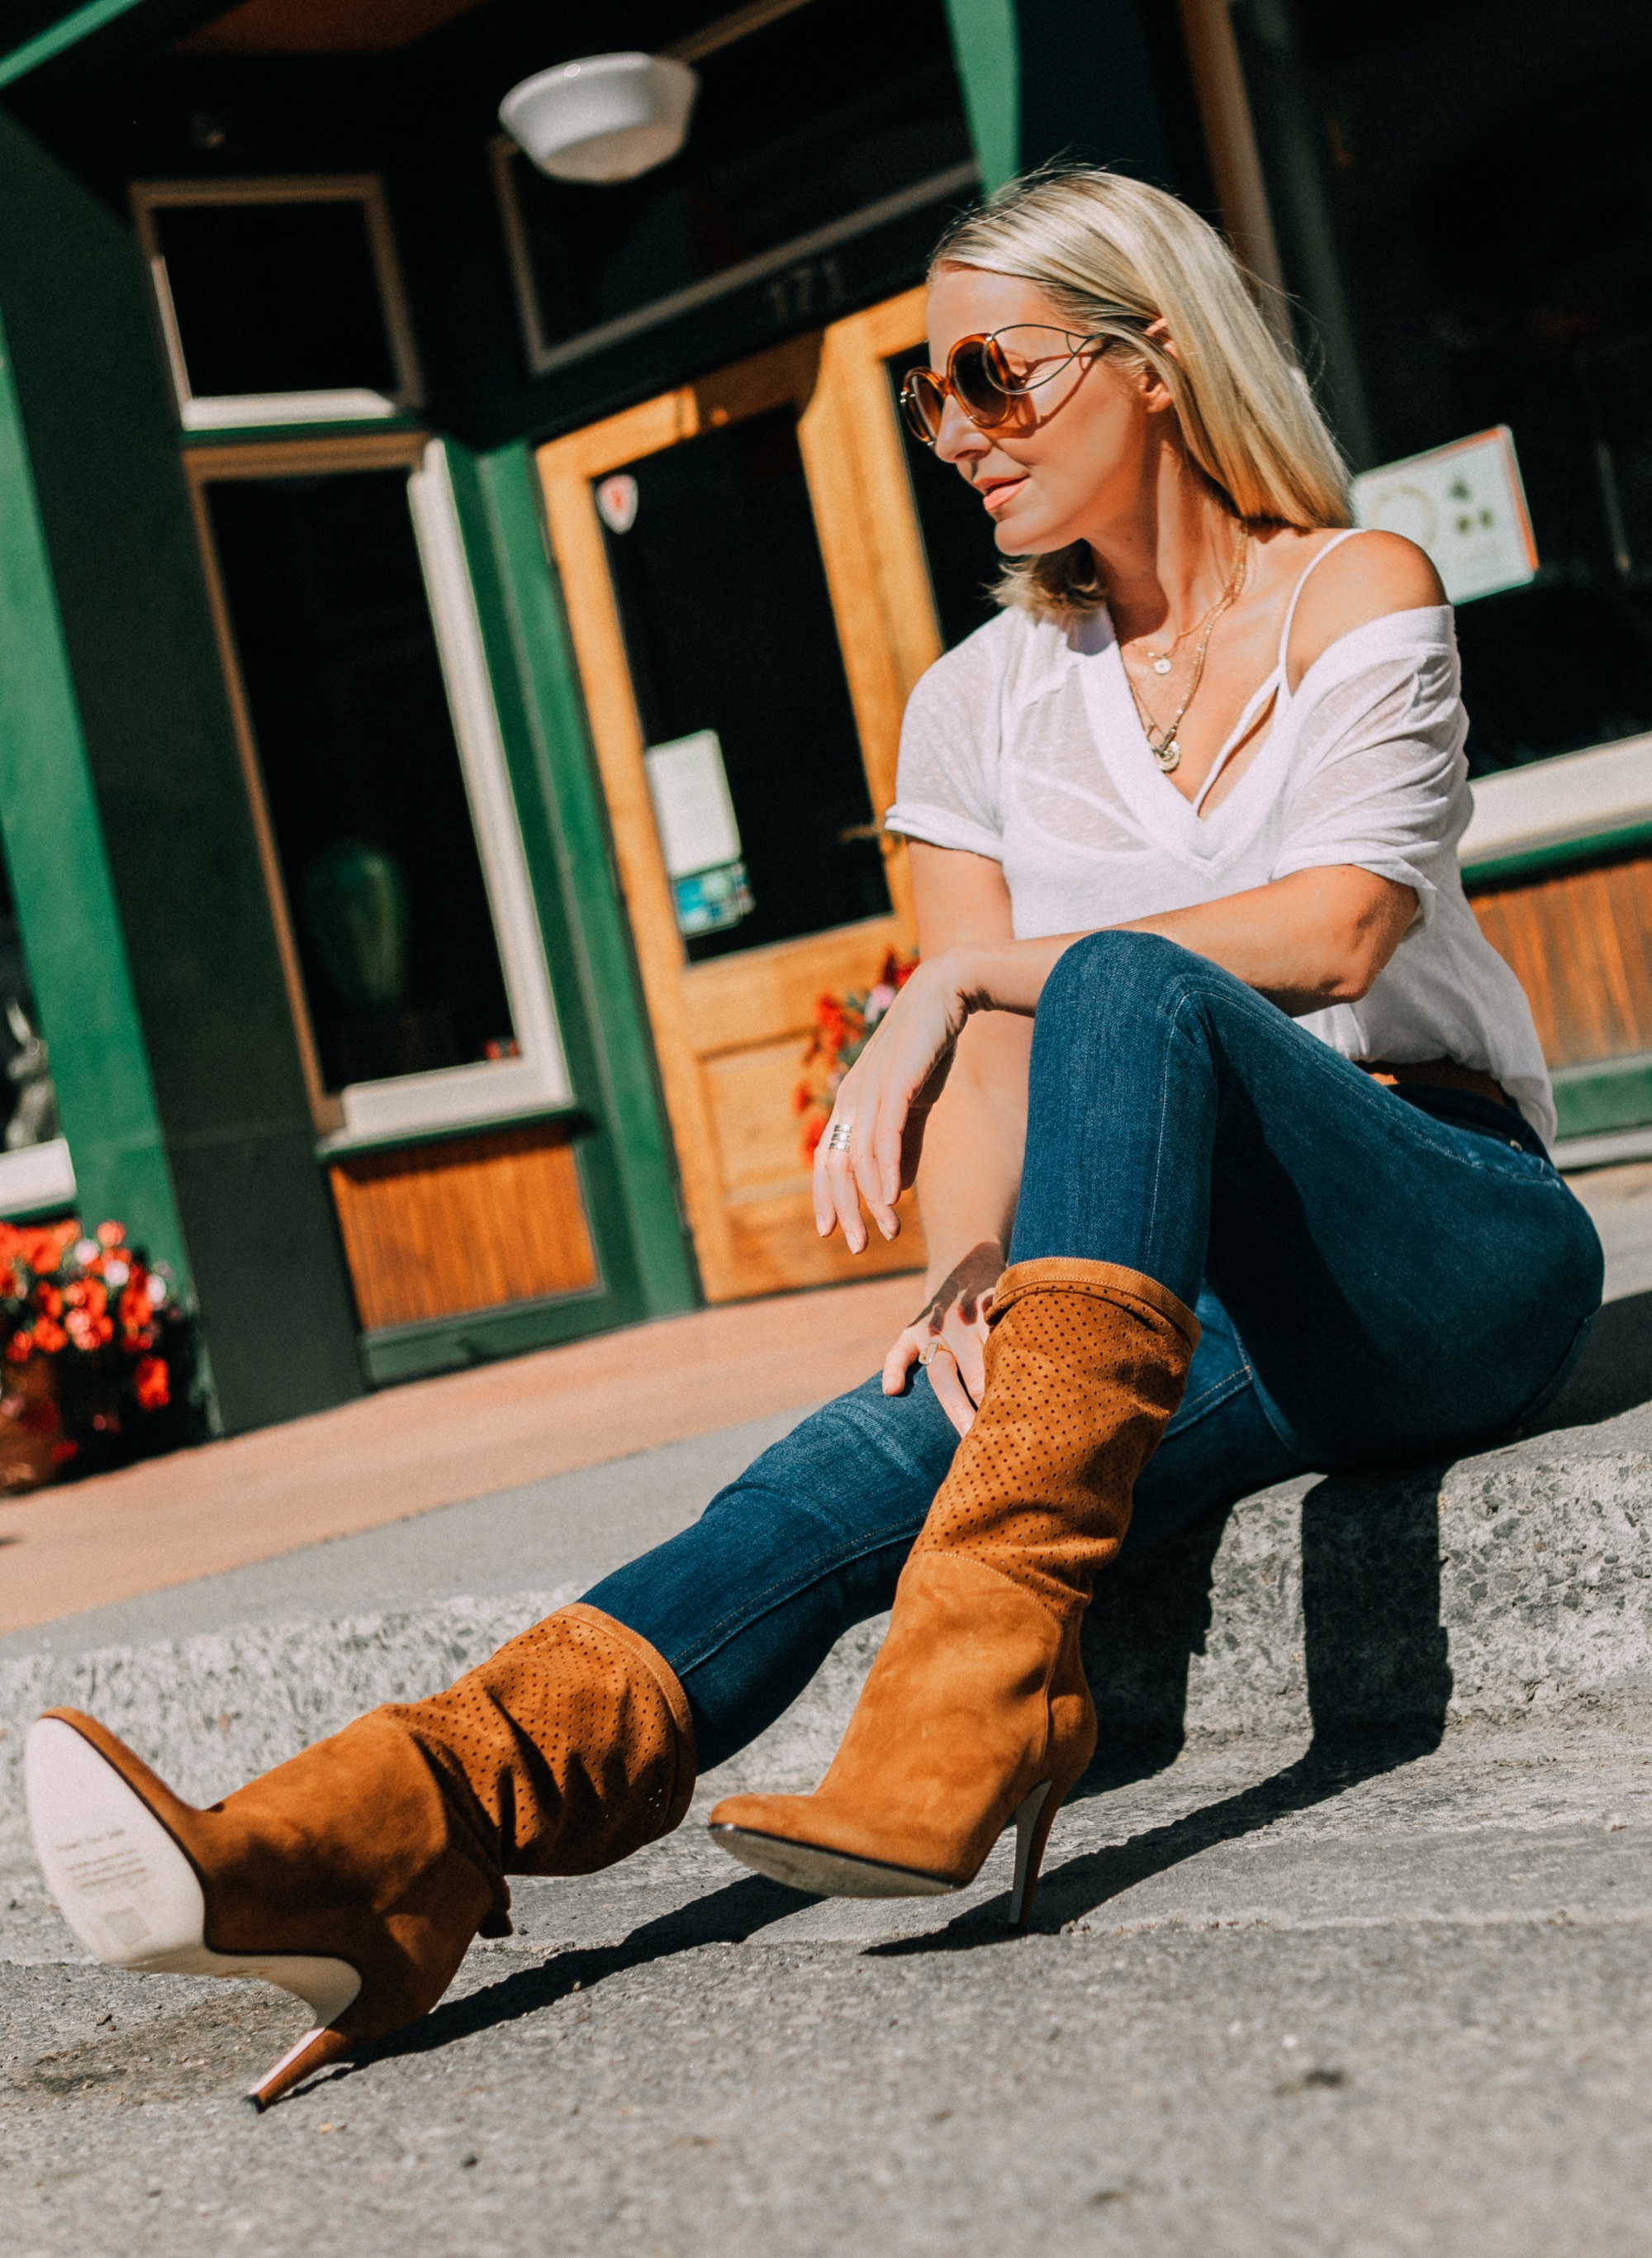 Tamara Mellon, Fashion blogger Erin Busbee of BusbeeStyle.com wearing dark was skinny jeans and white tee with stunning Tamara Mellon perforated brown boots in Telluride, Colorado